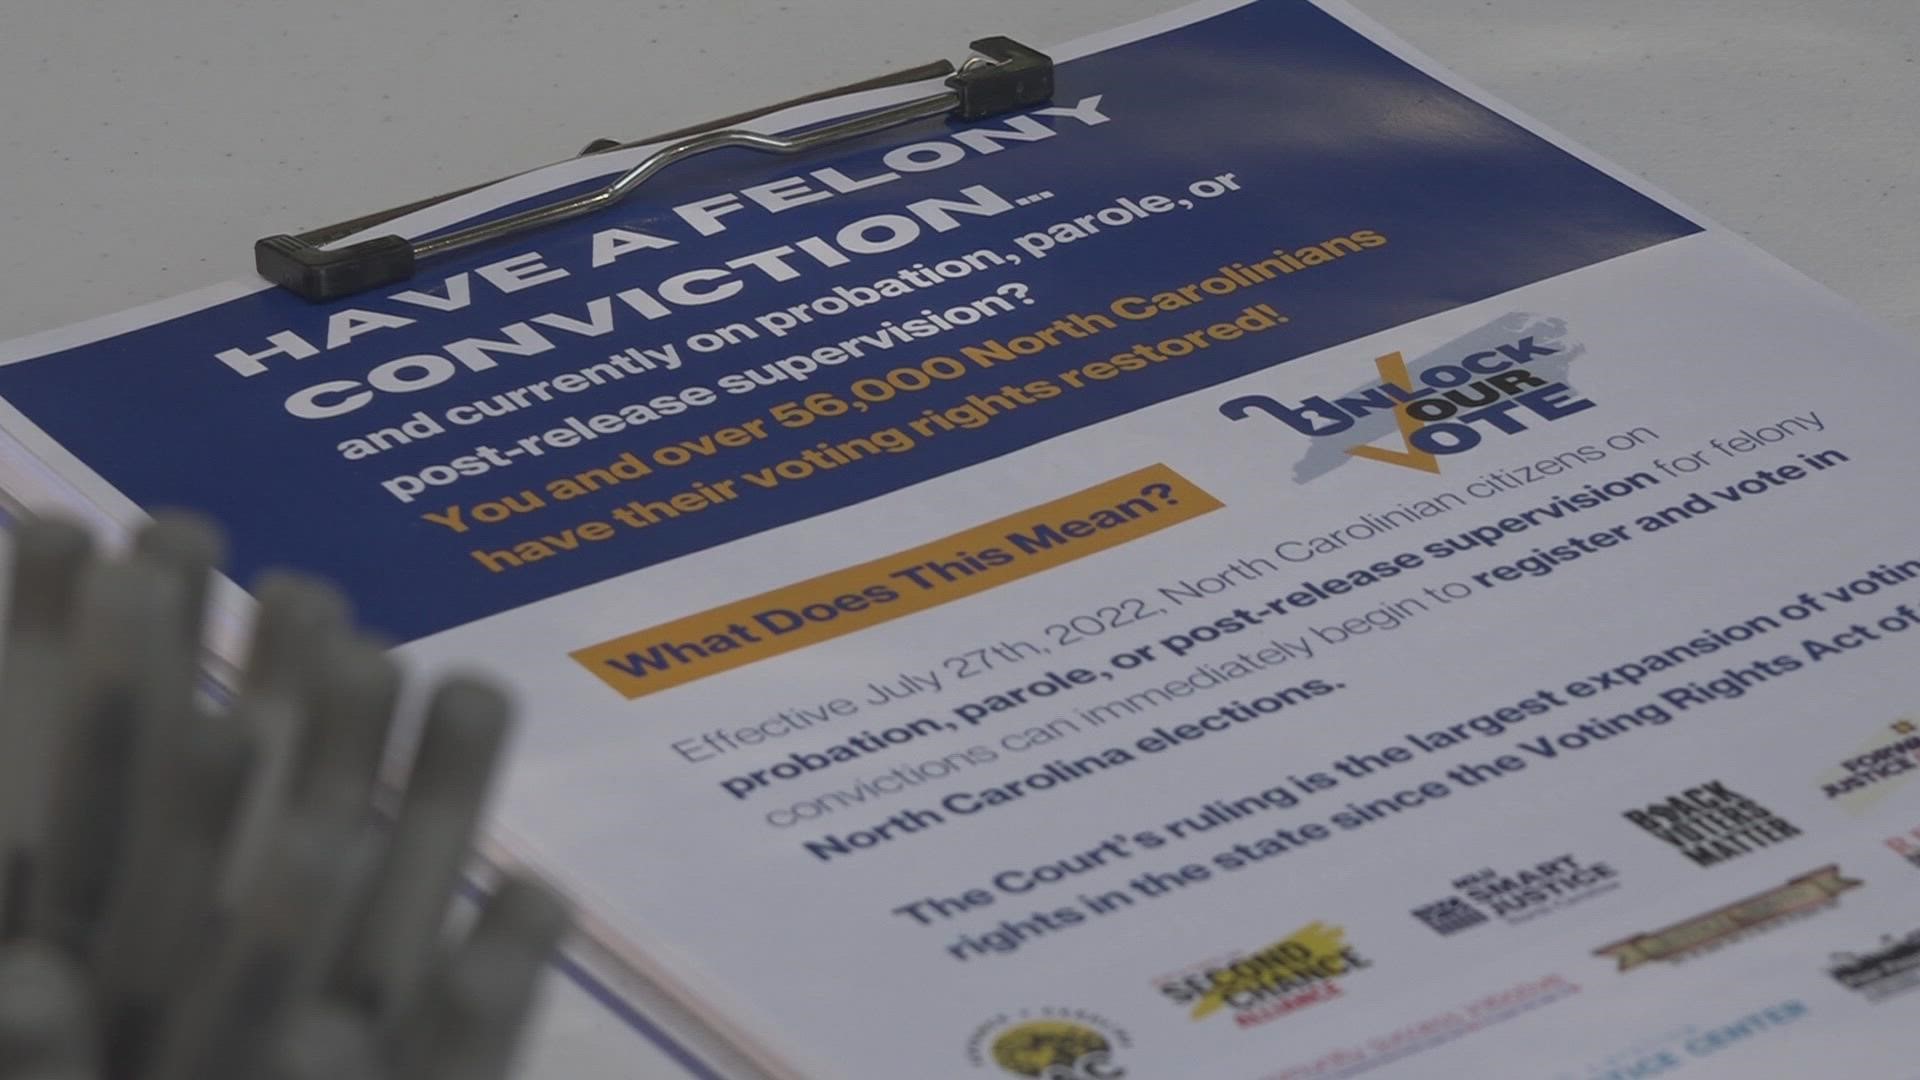 The Guilford County Sheriff's Office, You Can Vote and the NAACP are holding a drive to help those on probation or parole get registered.